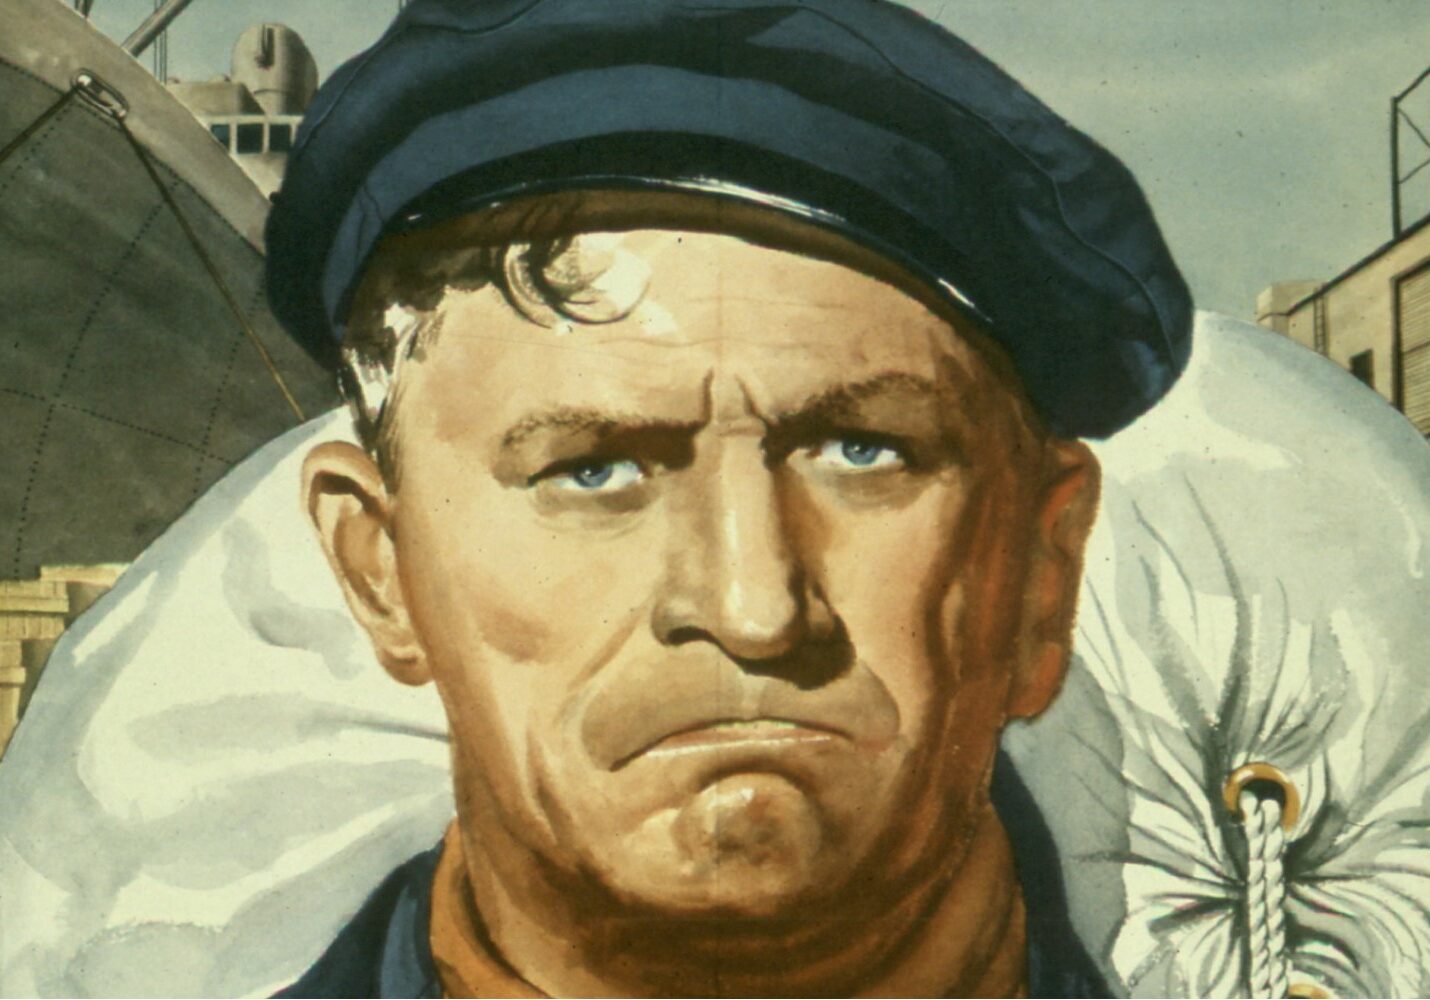 poster of merchant marine from wwII